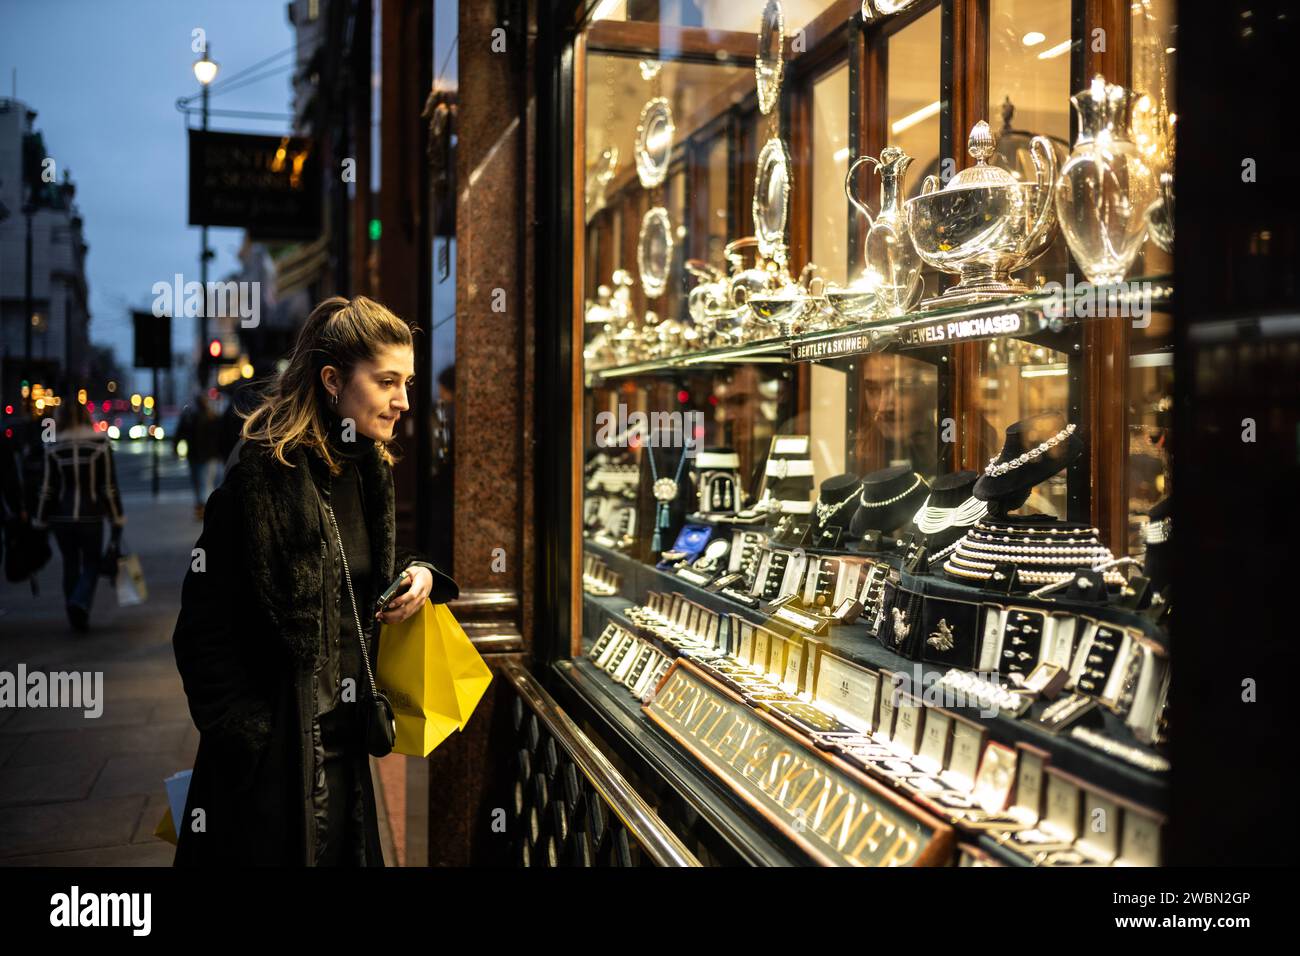 A young woman looks at some of the expensive jewellery and silverware on display at Bentley & Skinner, situated on Piccadilly, in the heart of Mayfair. Stock Photo